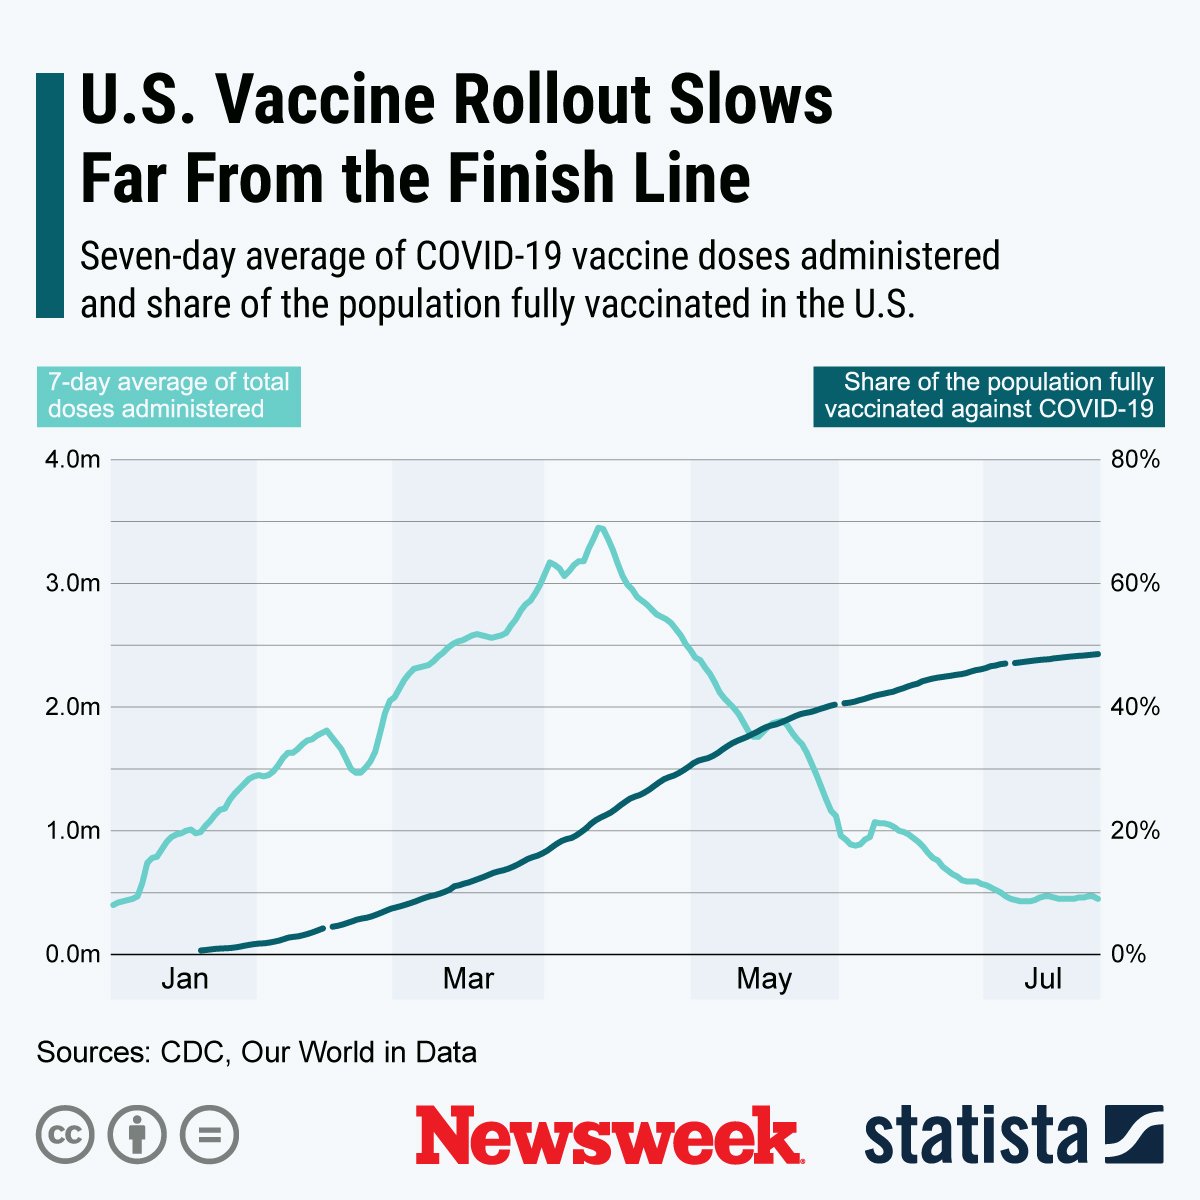 U.S. vaccine rollout slows down.